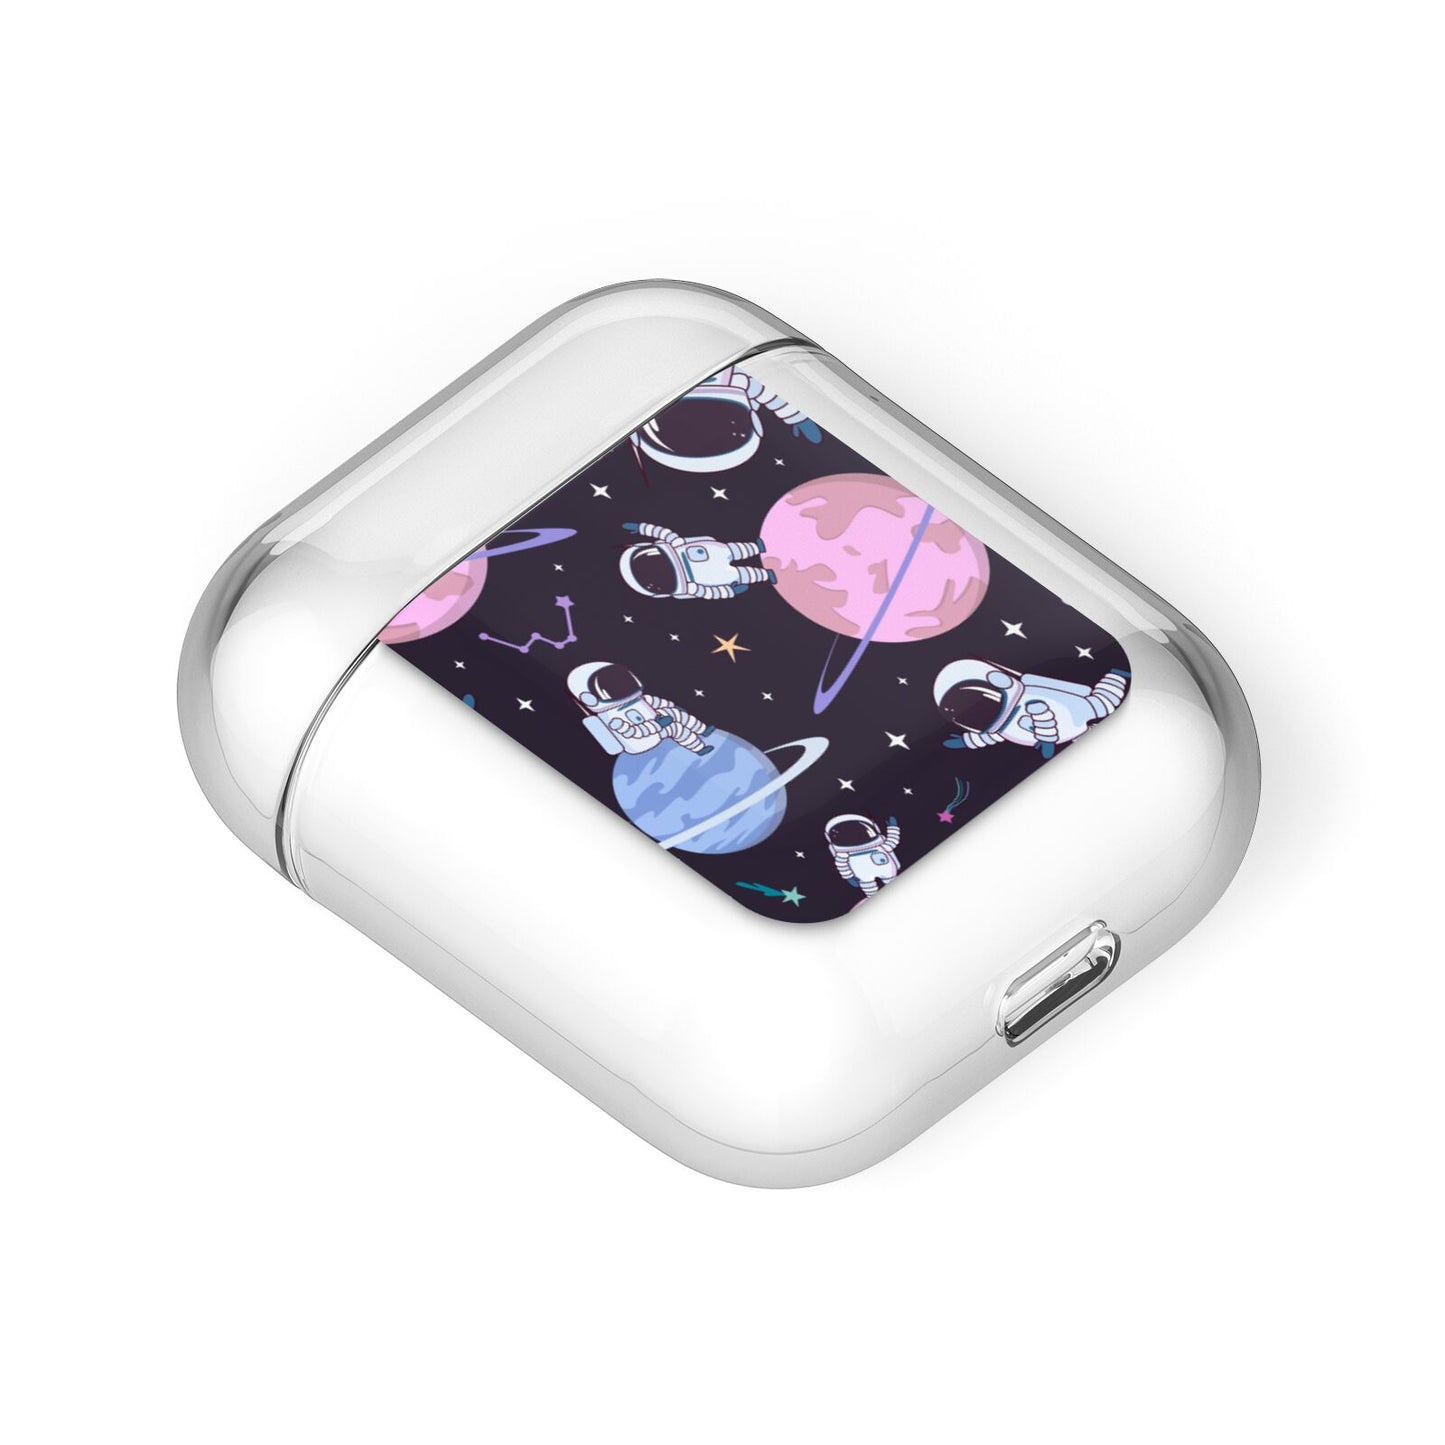 Pastel Hue Space Scene AirPods Case Laid Flat